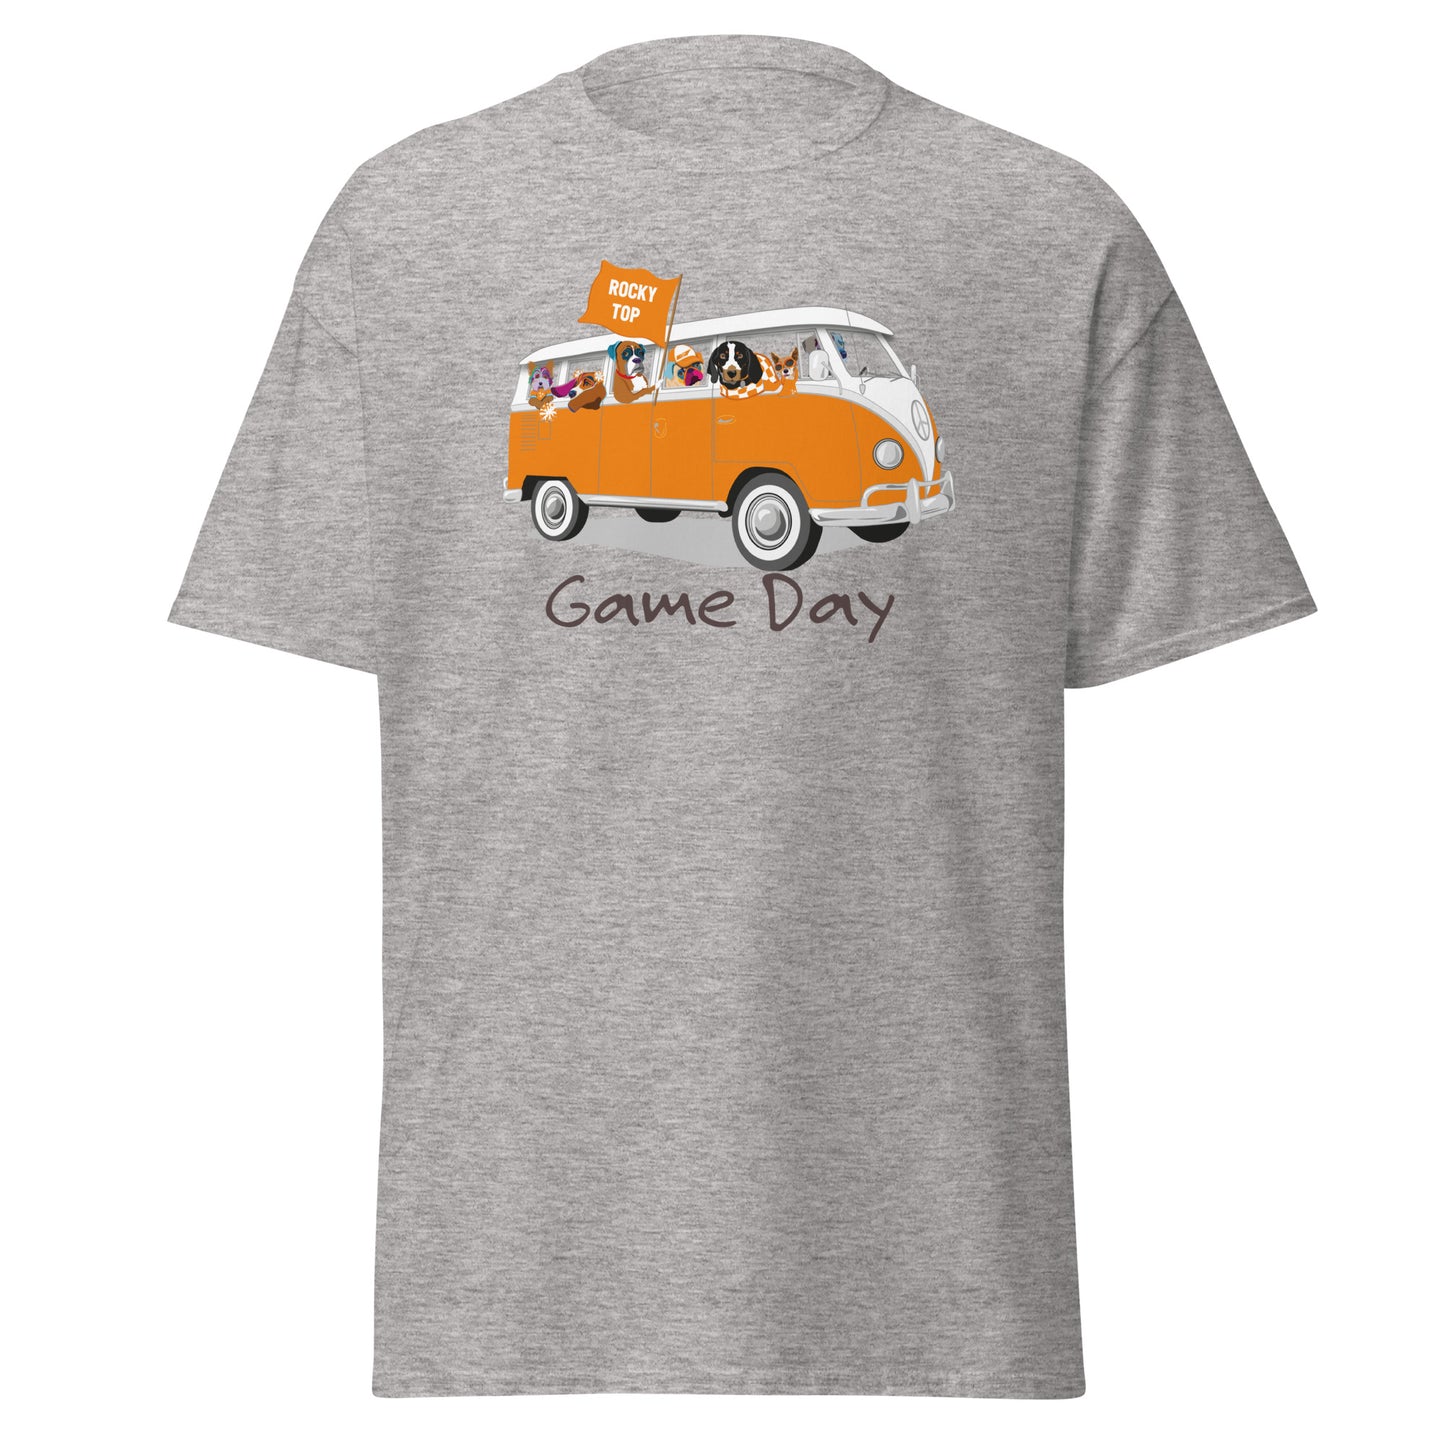 Men's classic tee Game Day in Tennessee party bus